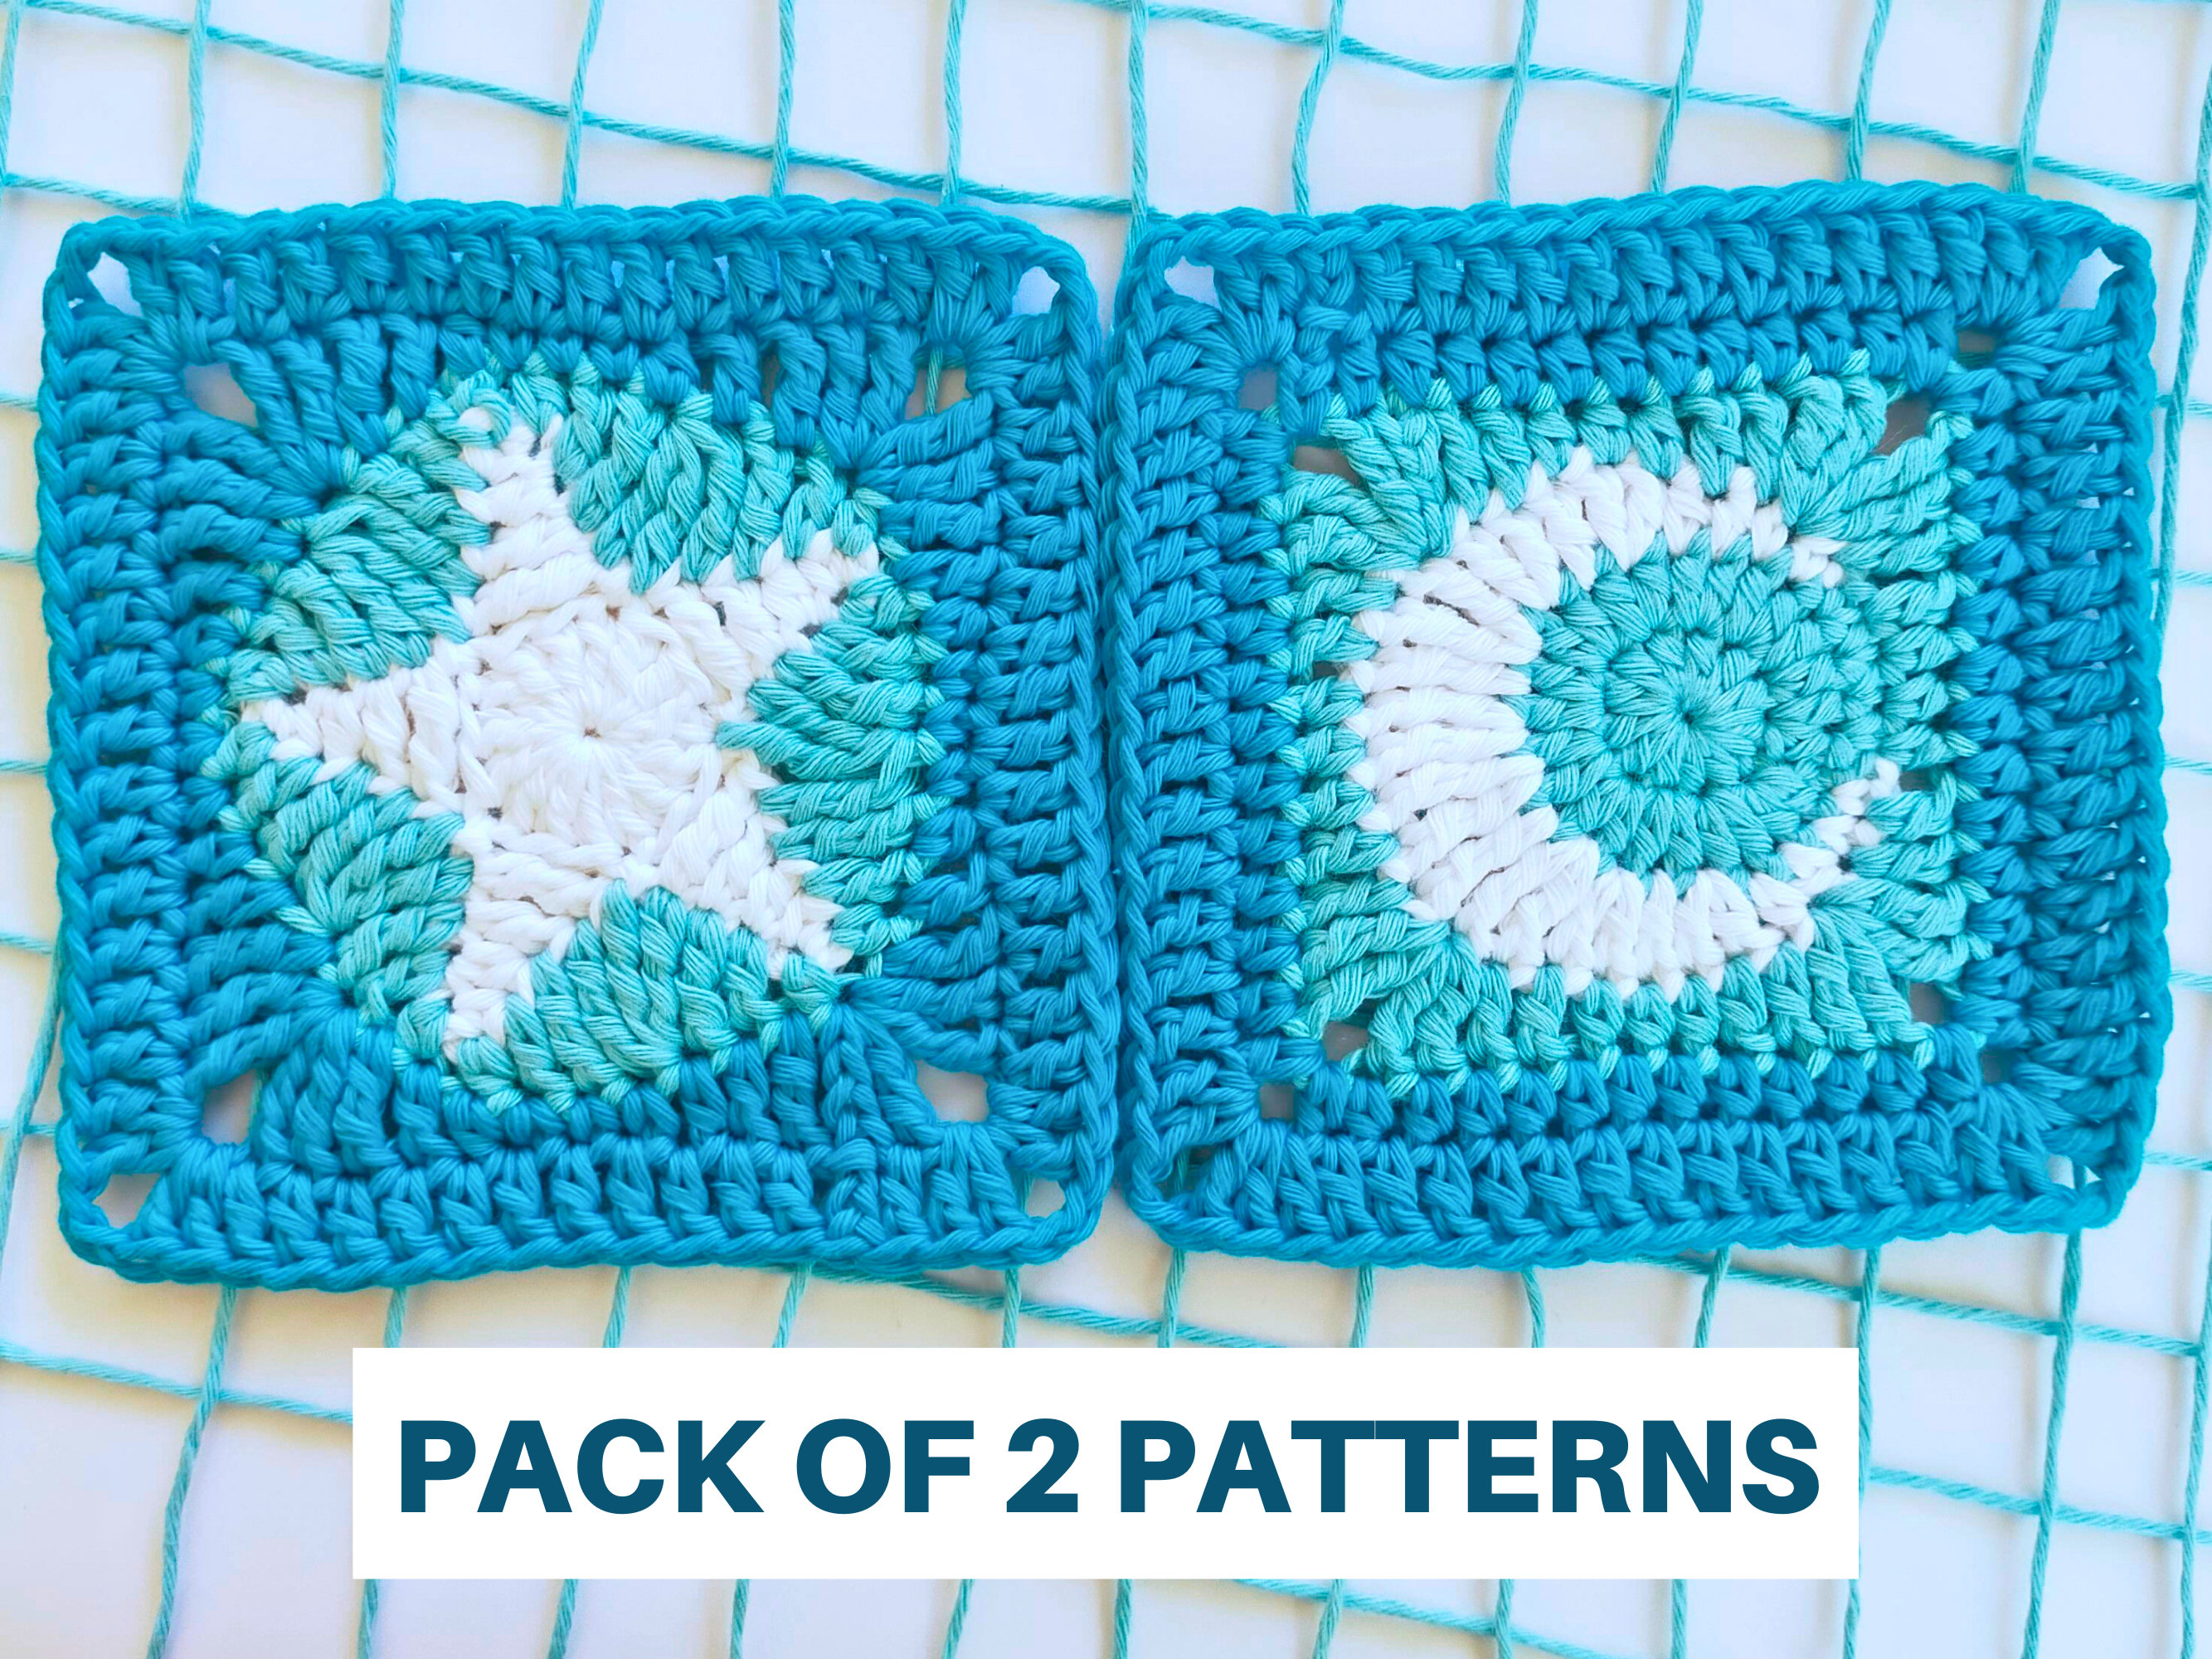 Twinkling Granny Square Crochet Pattern with Video